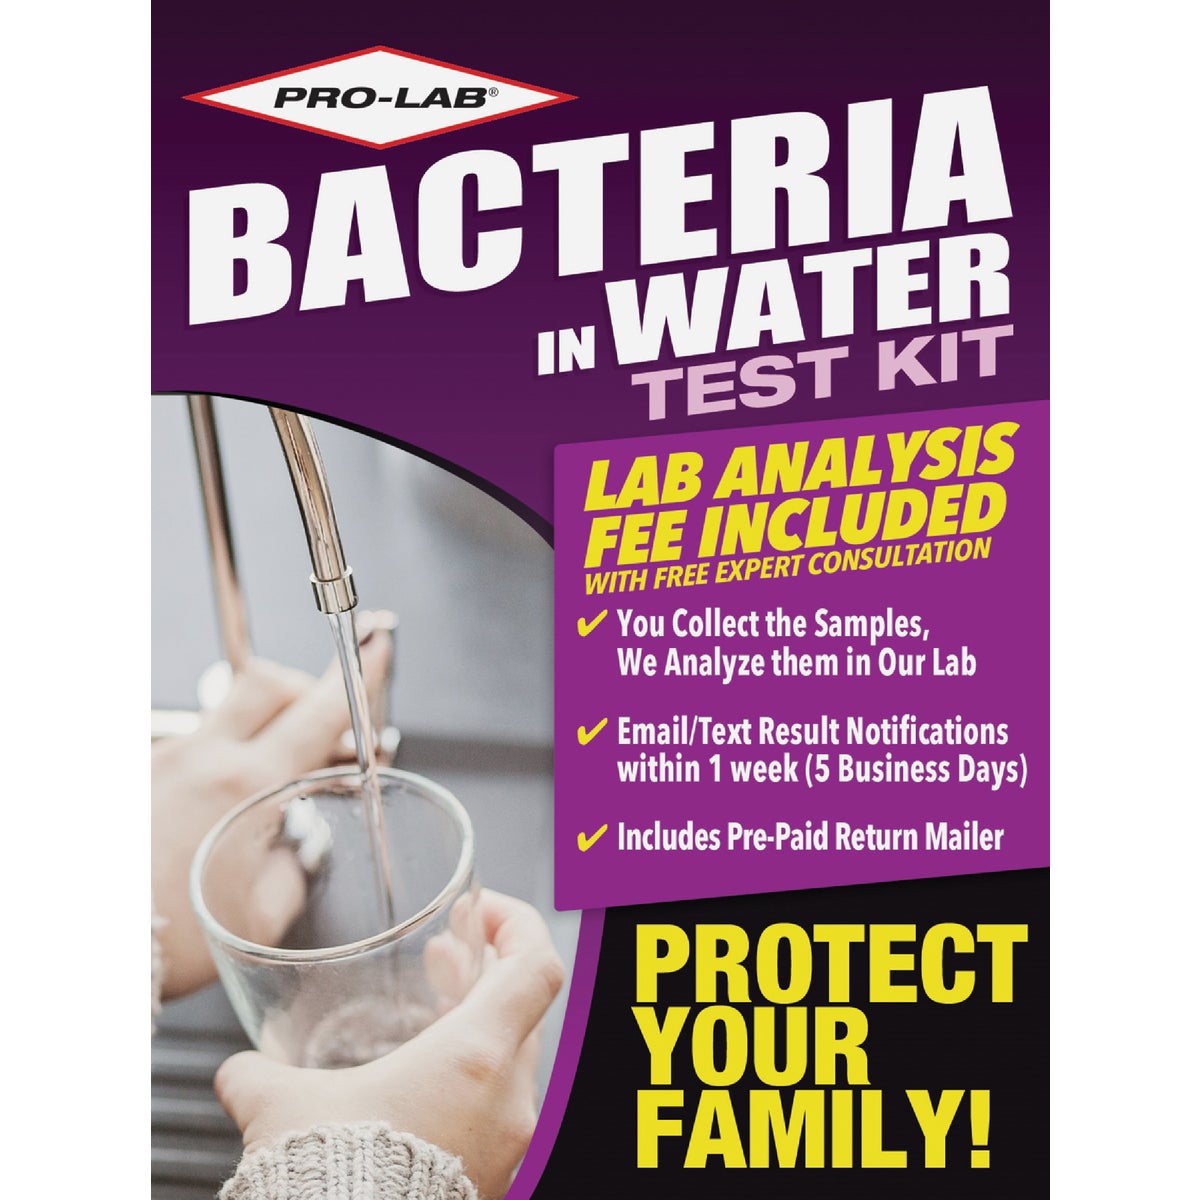 Item 426131, Simple to use DIY test kit indicates the presence of dangerous Coliform and